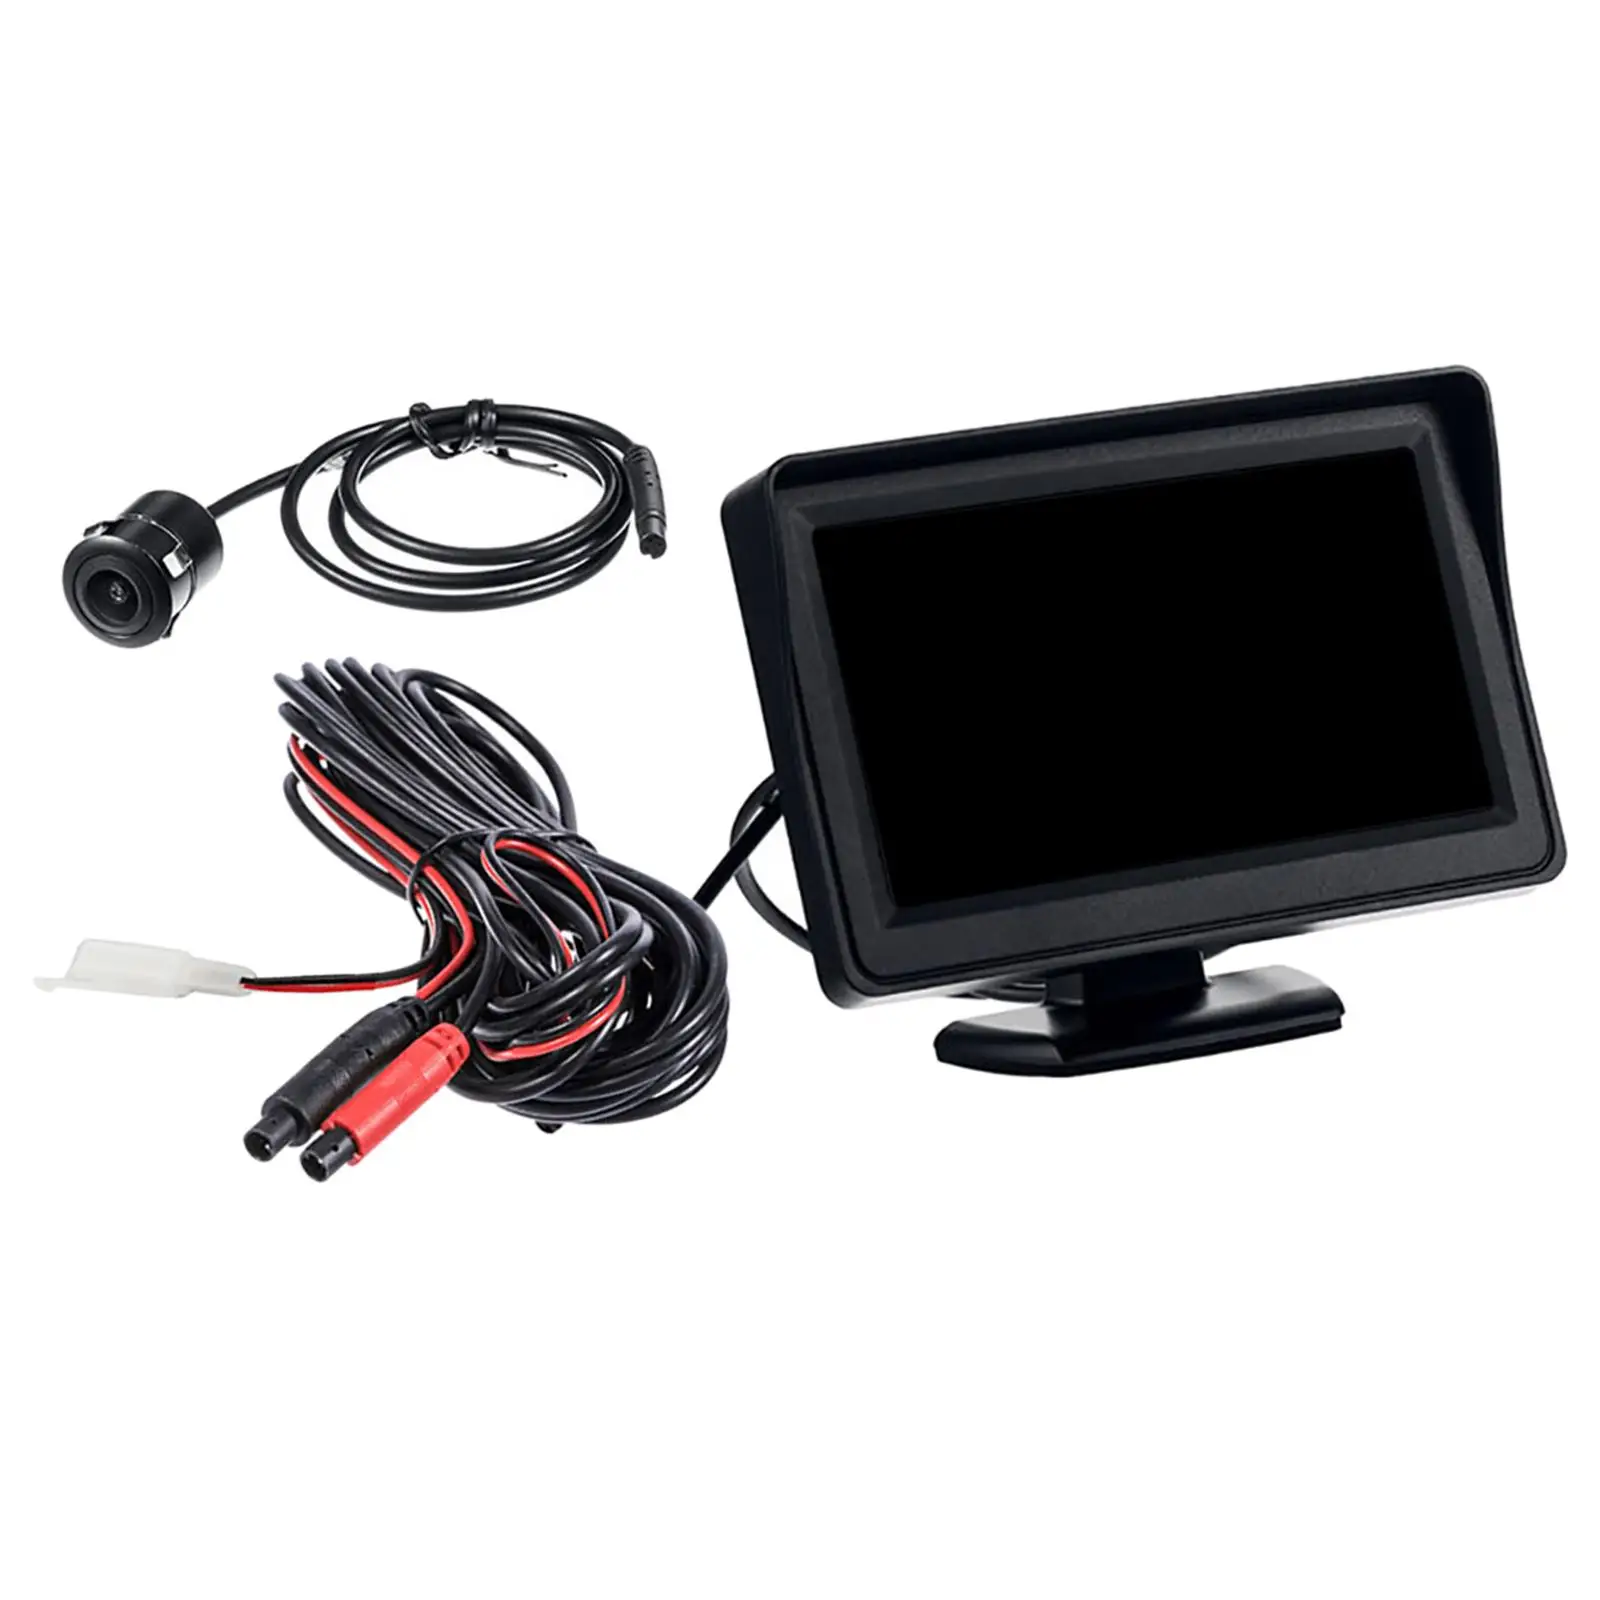 5 inch Rear View Camera Reverse Assistance Camera Equipment Color HD Lens Car Monitor